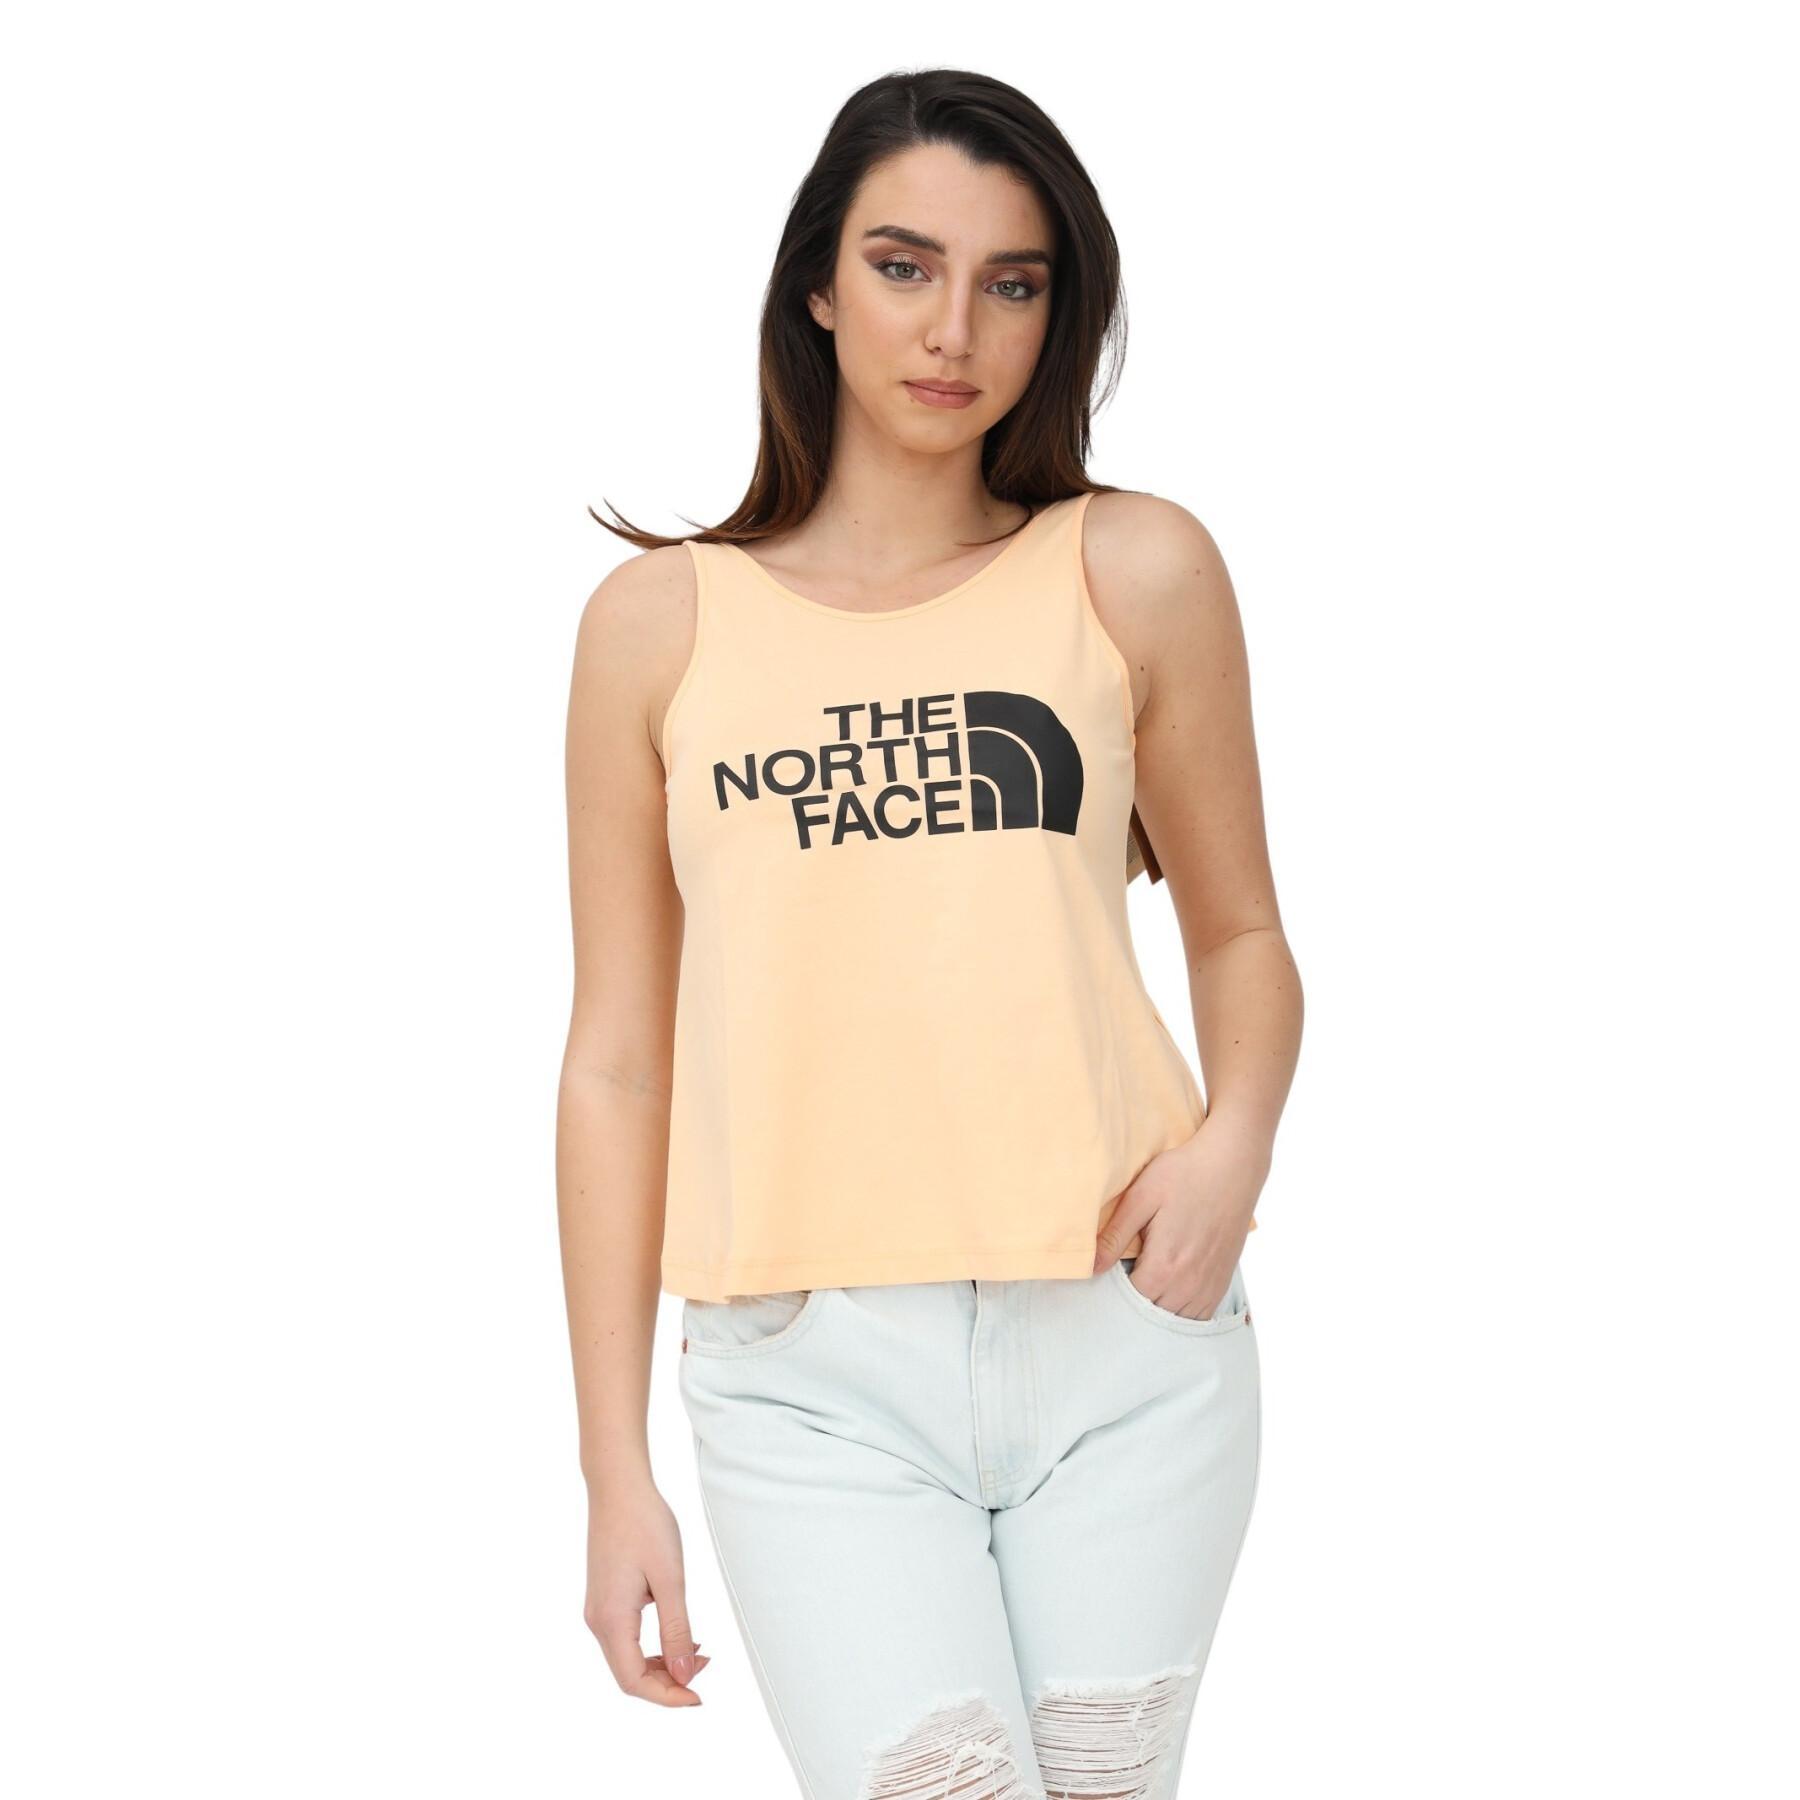 Women's tank top The North Face Easy